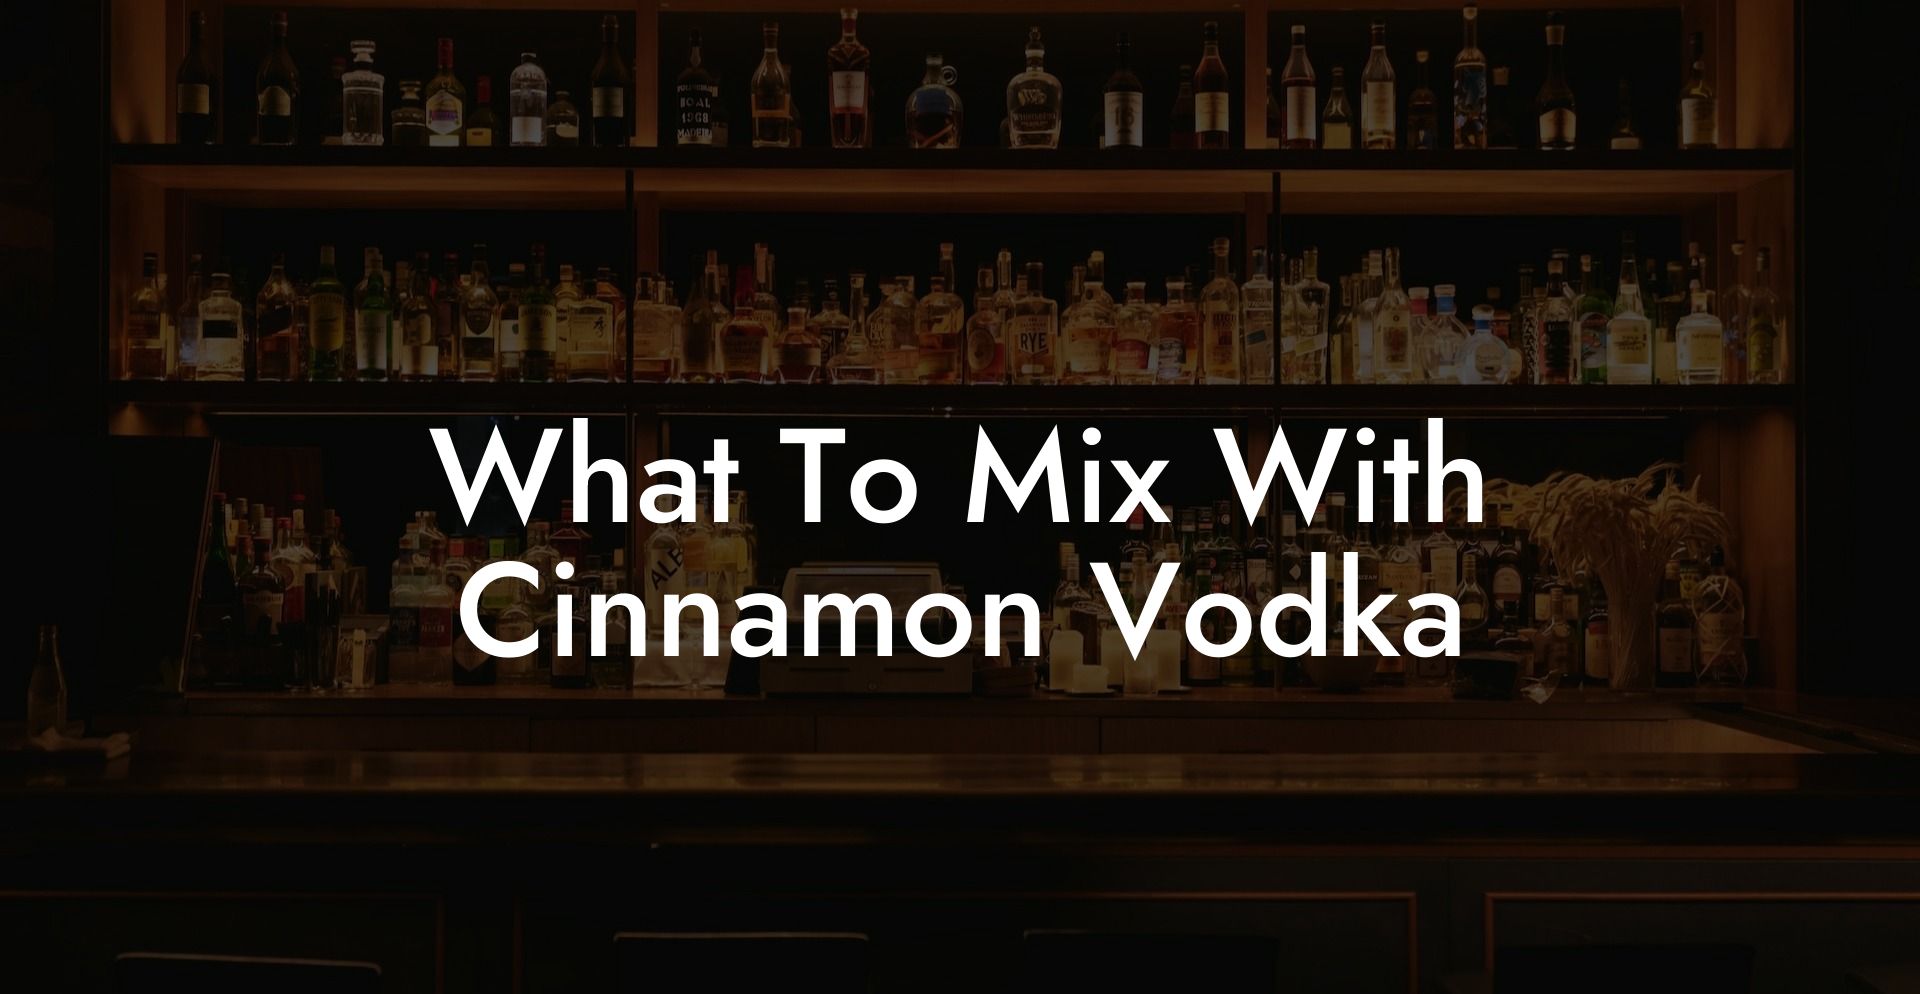 What To Mix With Cinnamon Vodka